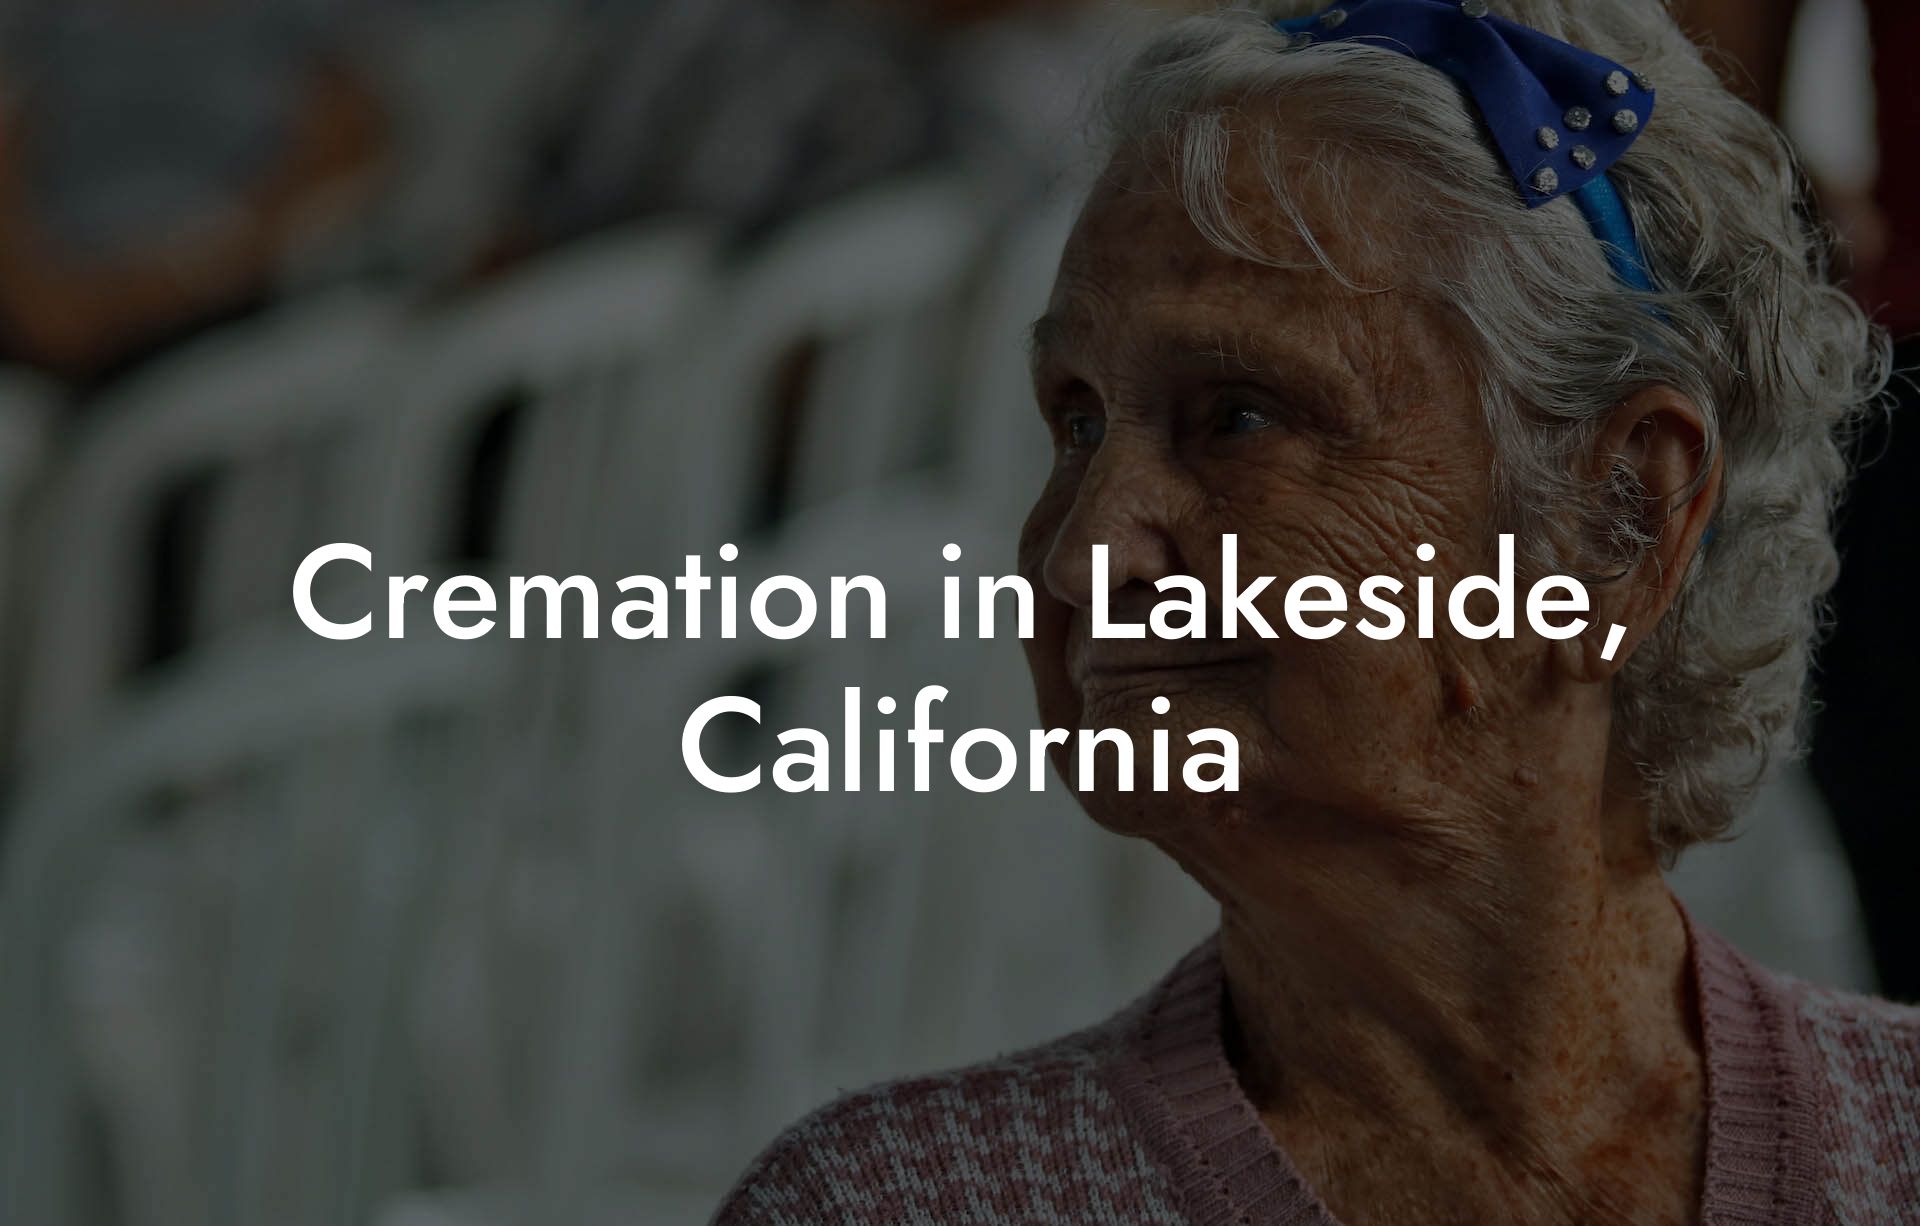 Cremation in Lakeside, California